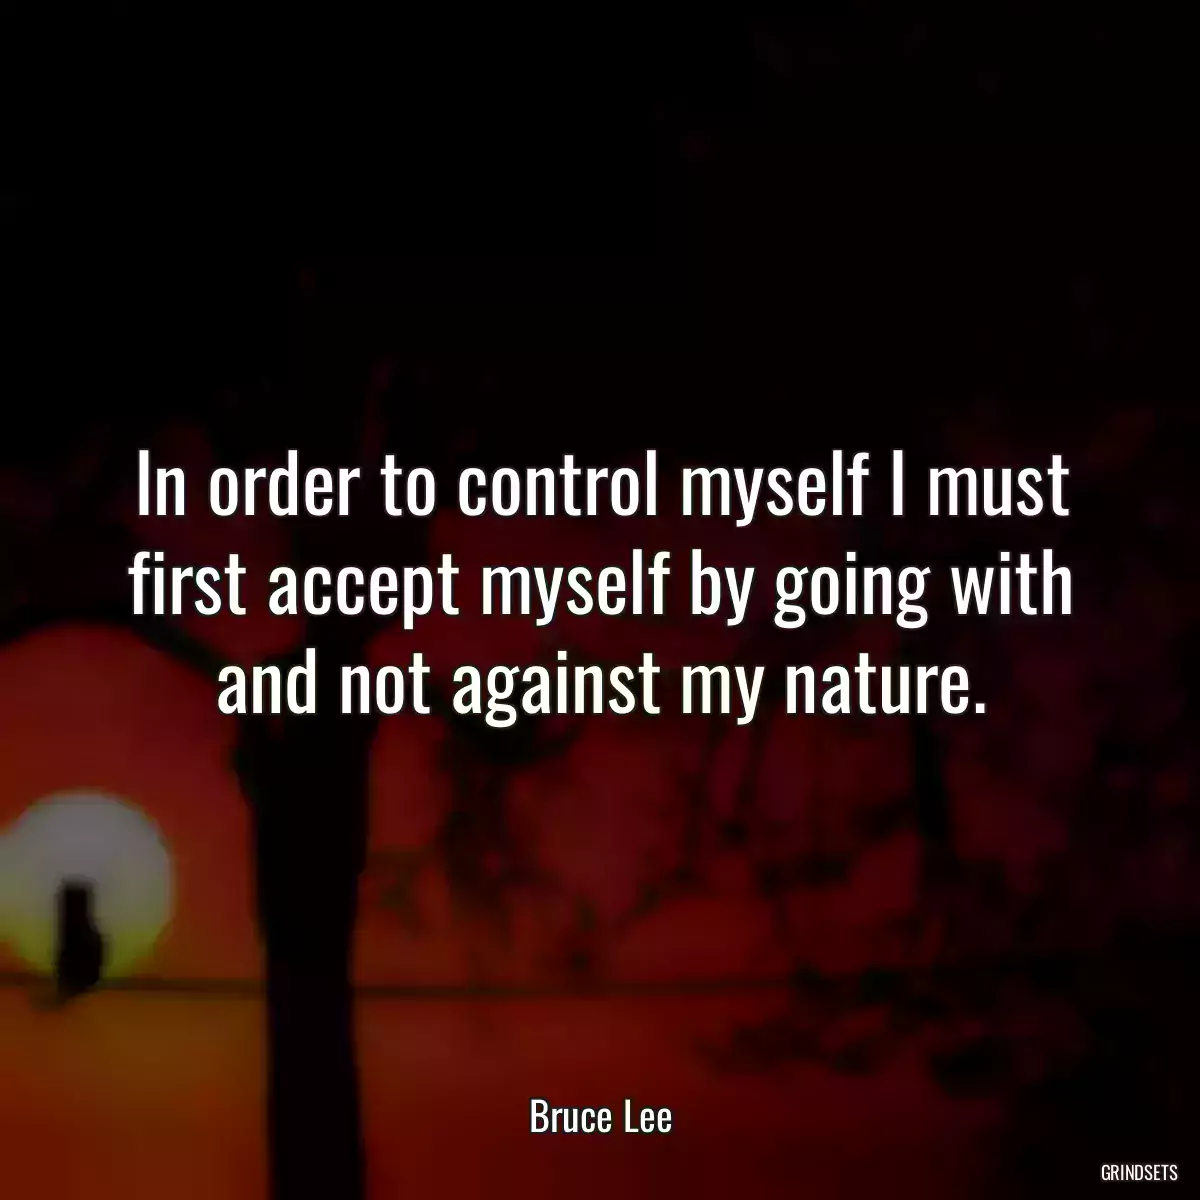 In order to control myself I must first accept myself by going with and not against my nature.